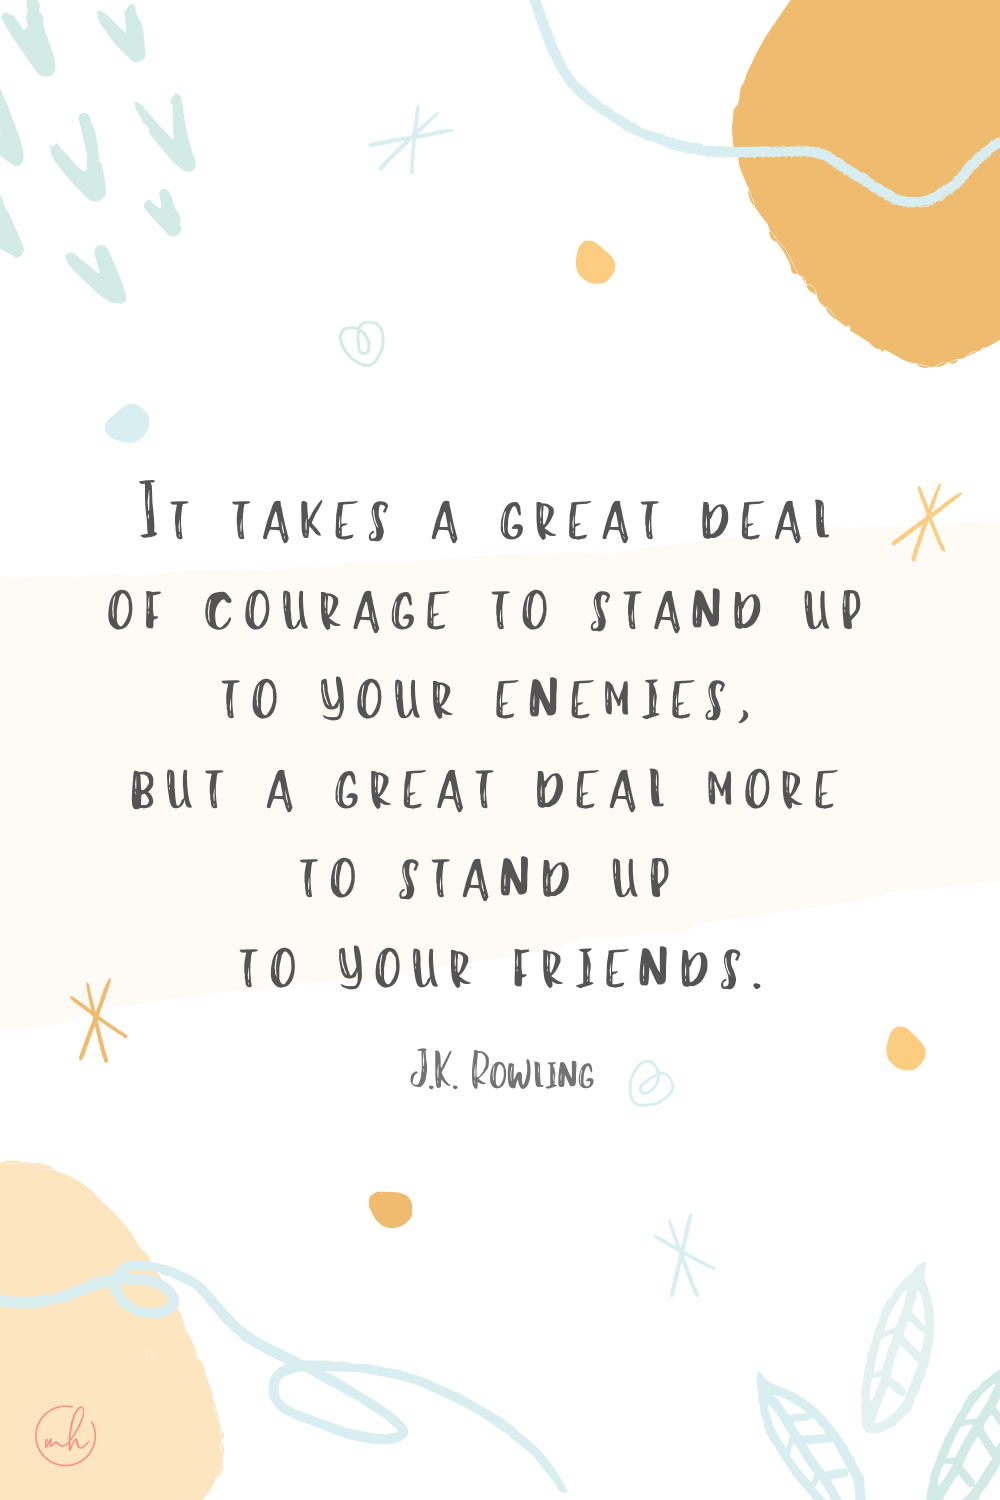 “It takes a great deal of courage to stand up to your enemies, but a great deal more to stand up to your friends.” - J.K. Rowling